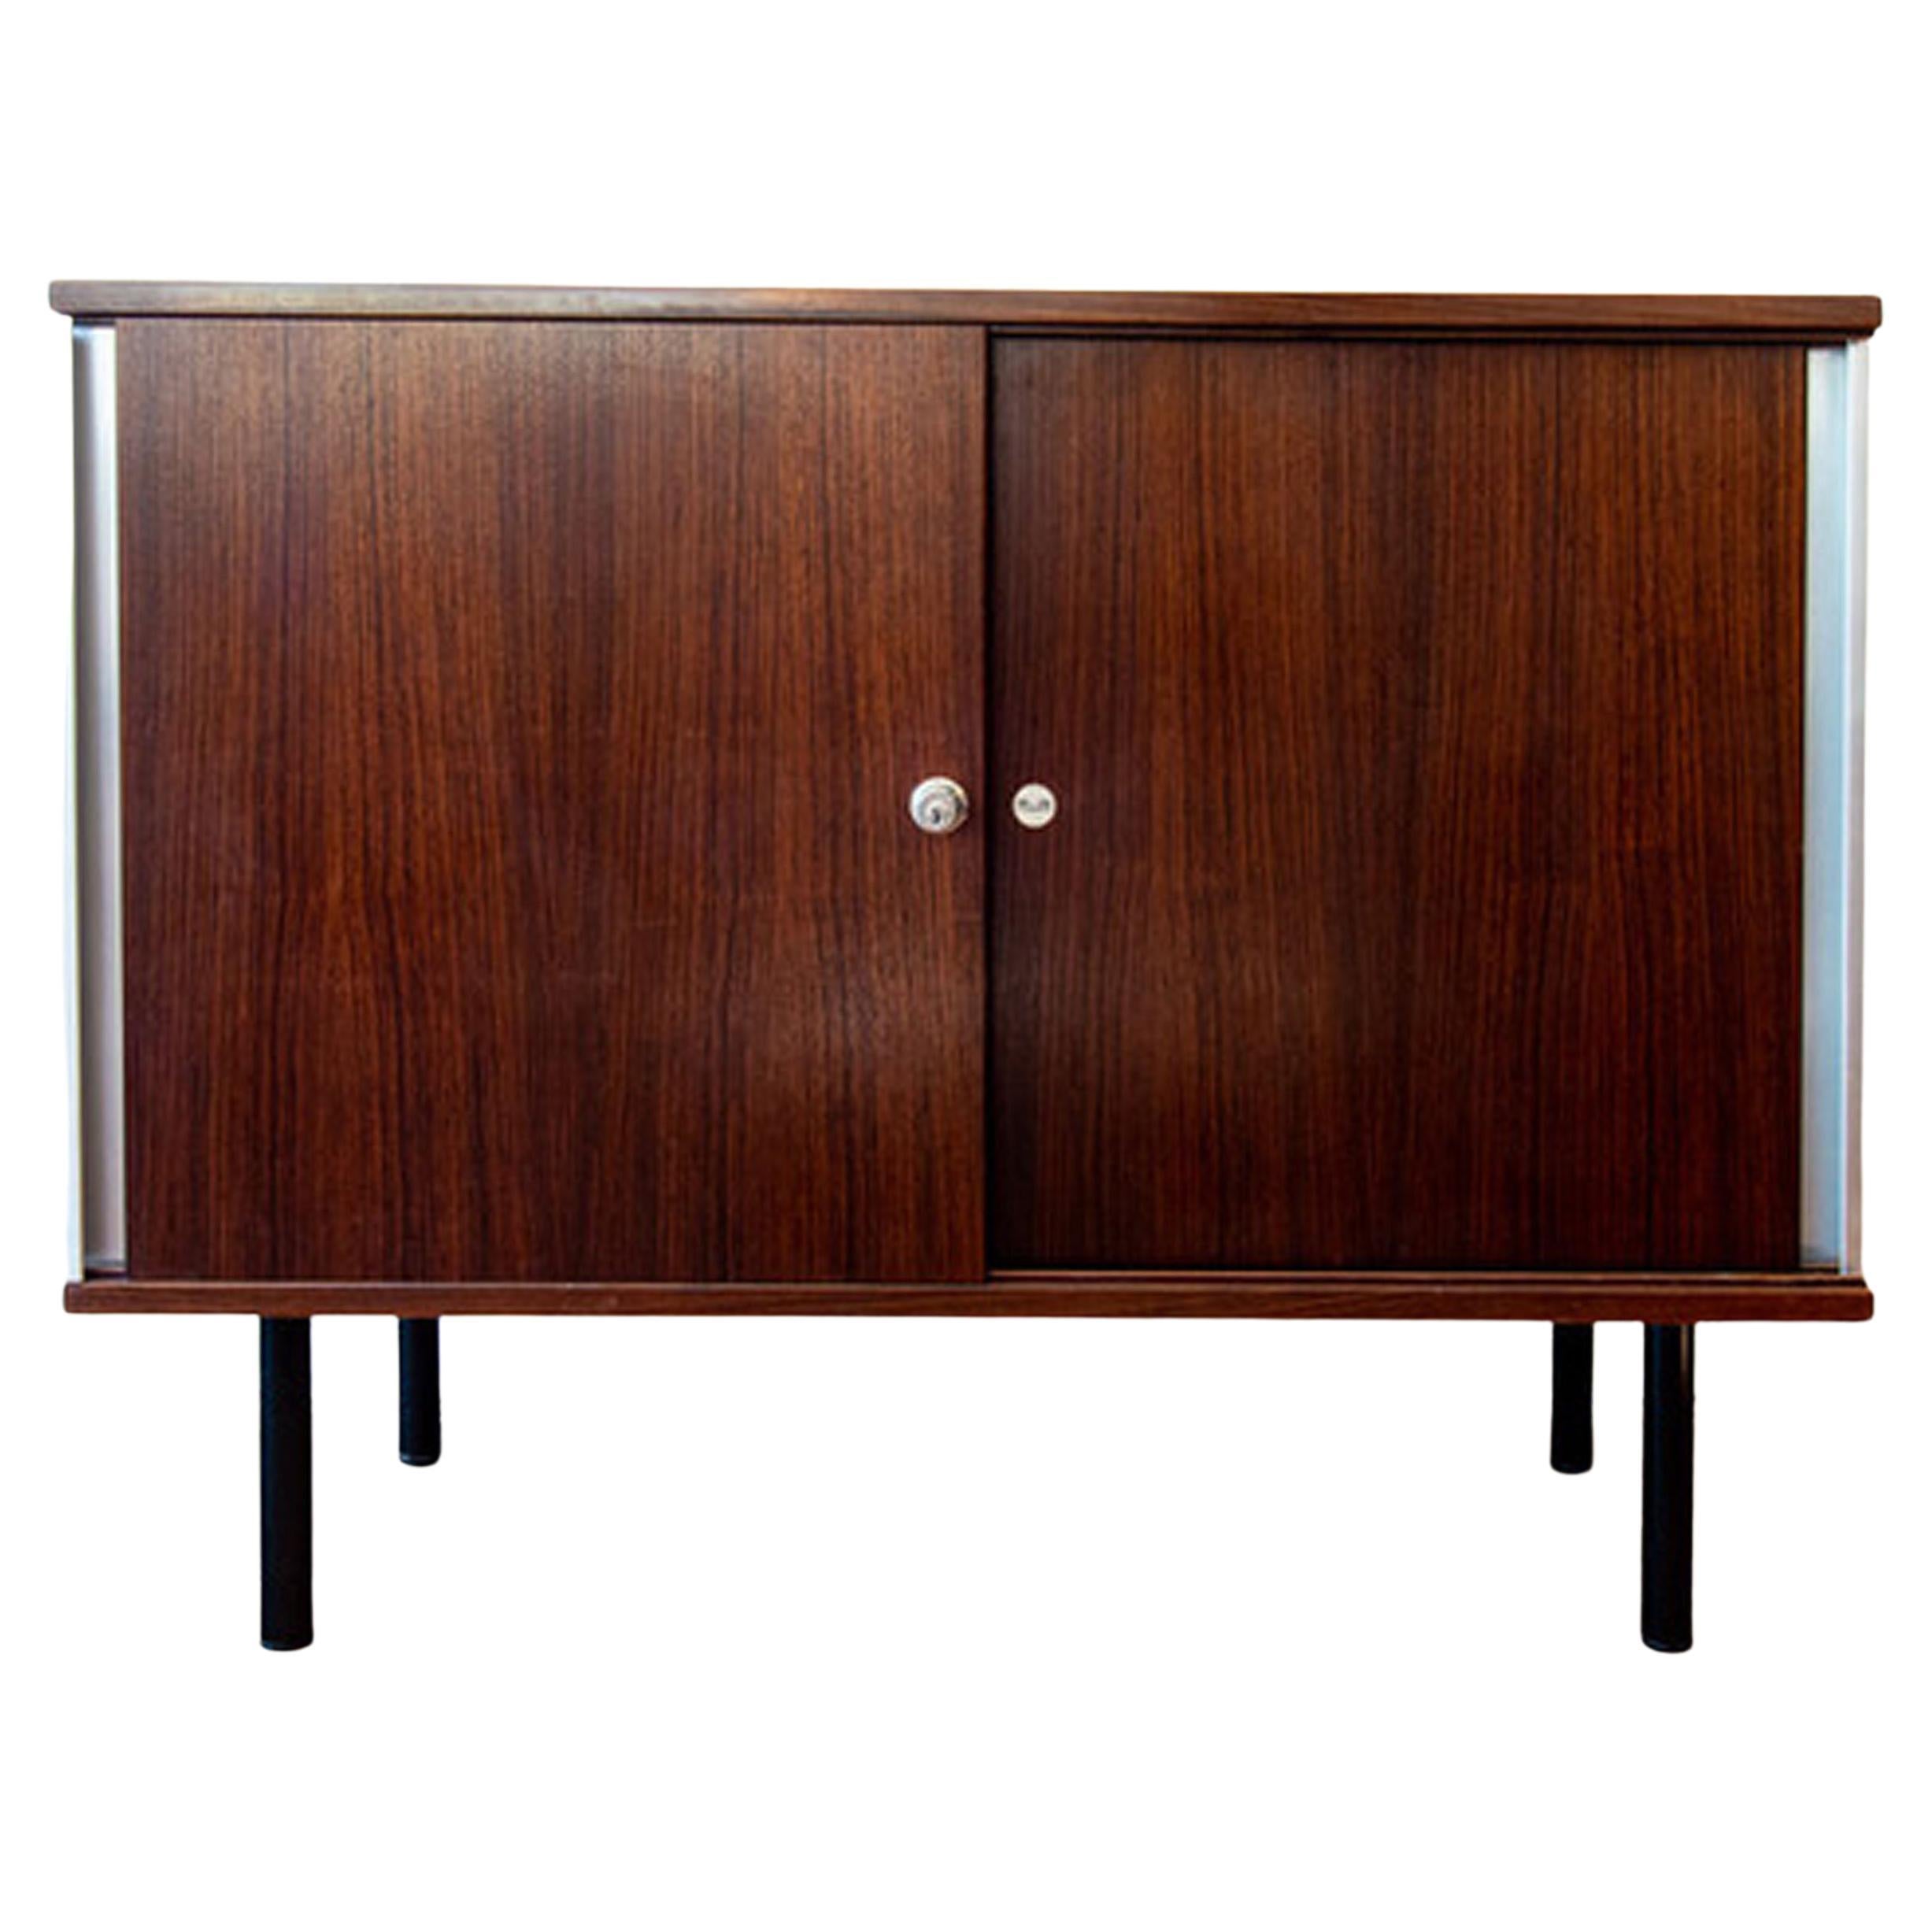 Set of 2 Sideboards by Ico Parisi for MIM Roma, 1958